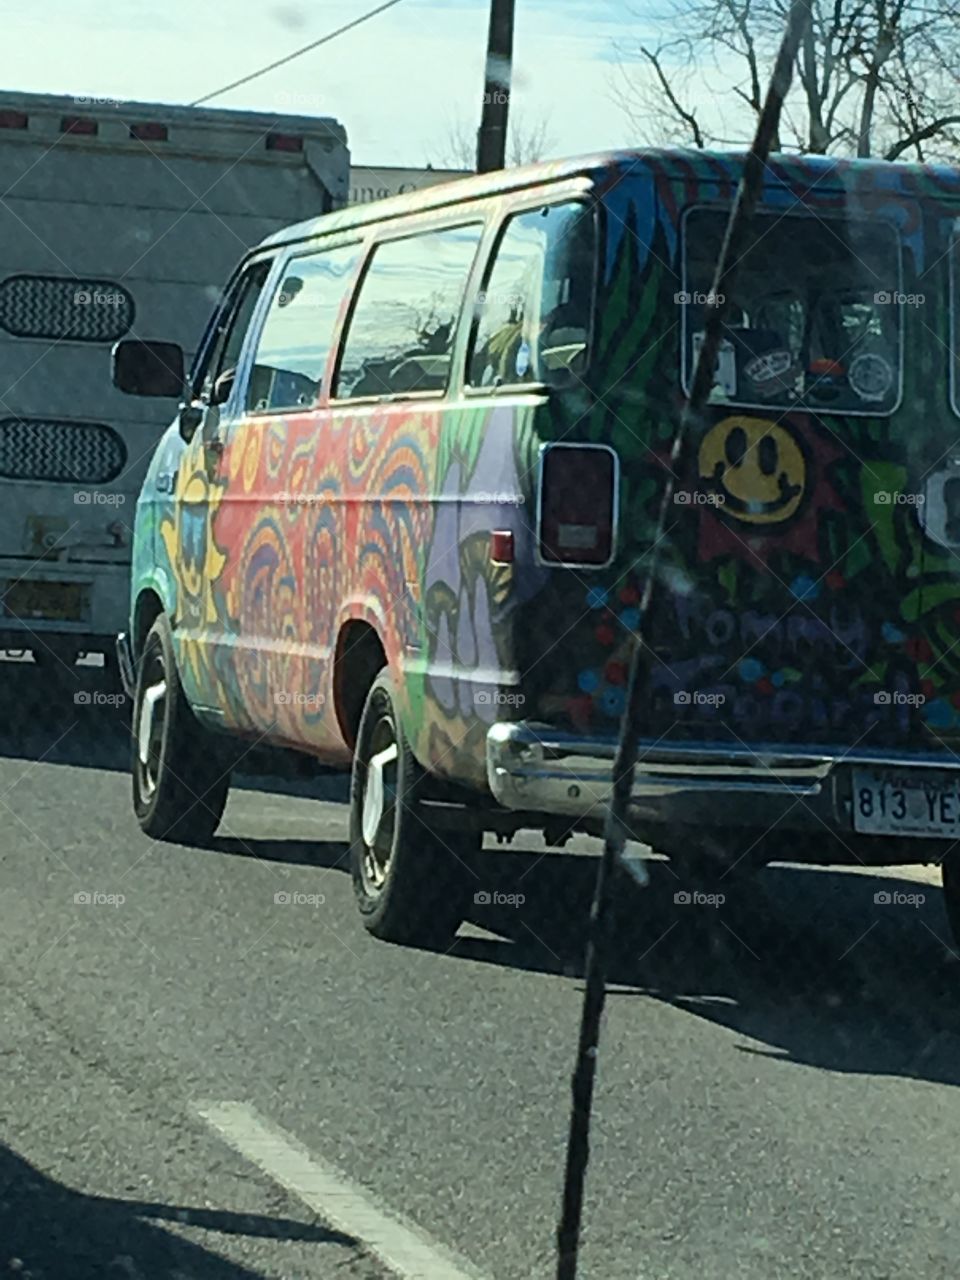 Seen this wild hippie looking van yesterday and just loved all the happy colors!